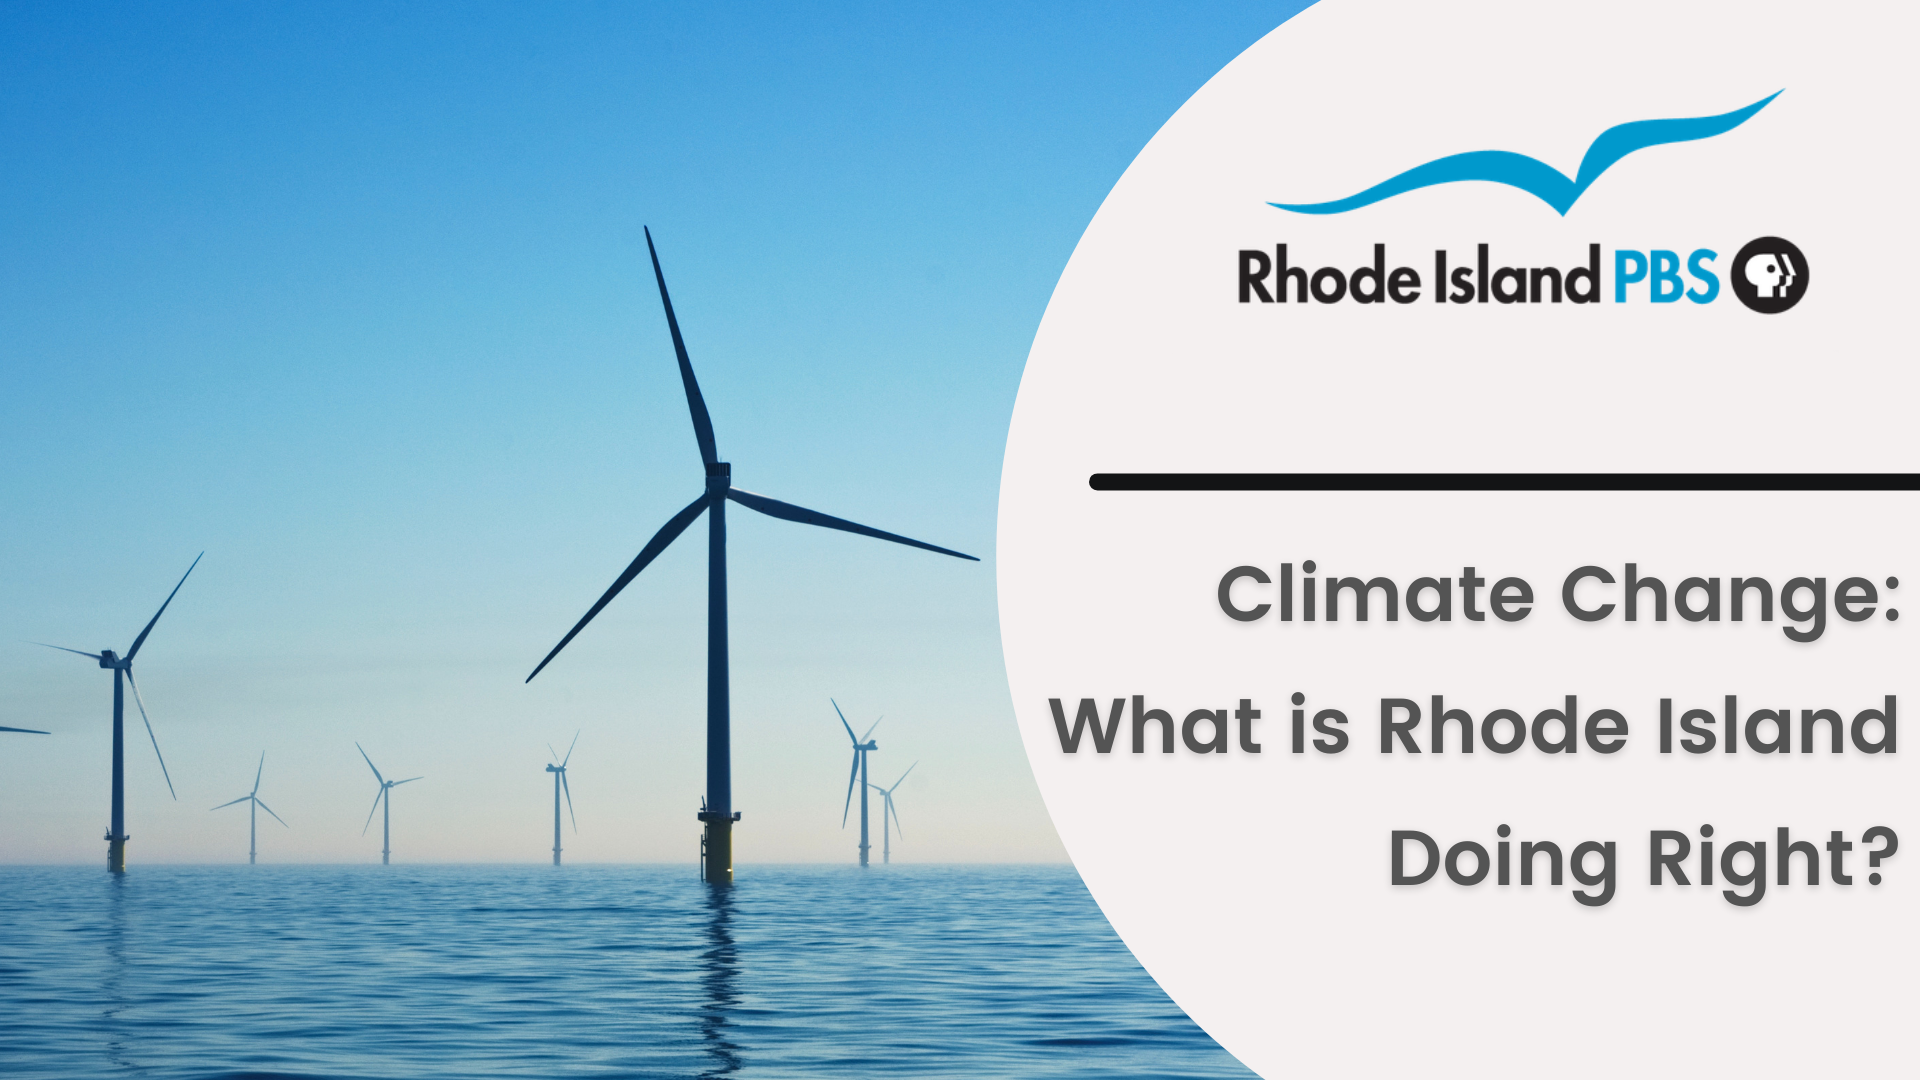 Climate Change: What is Rhode Island Doing Right?